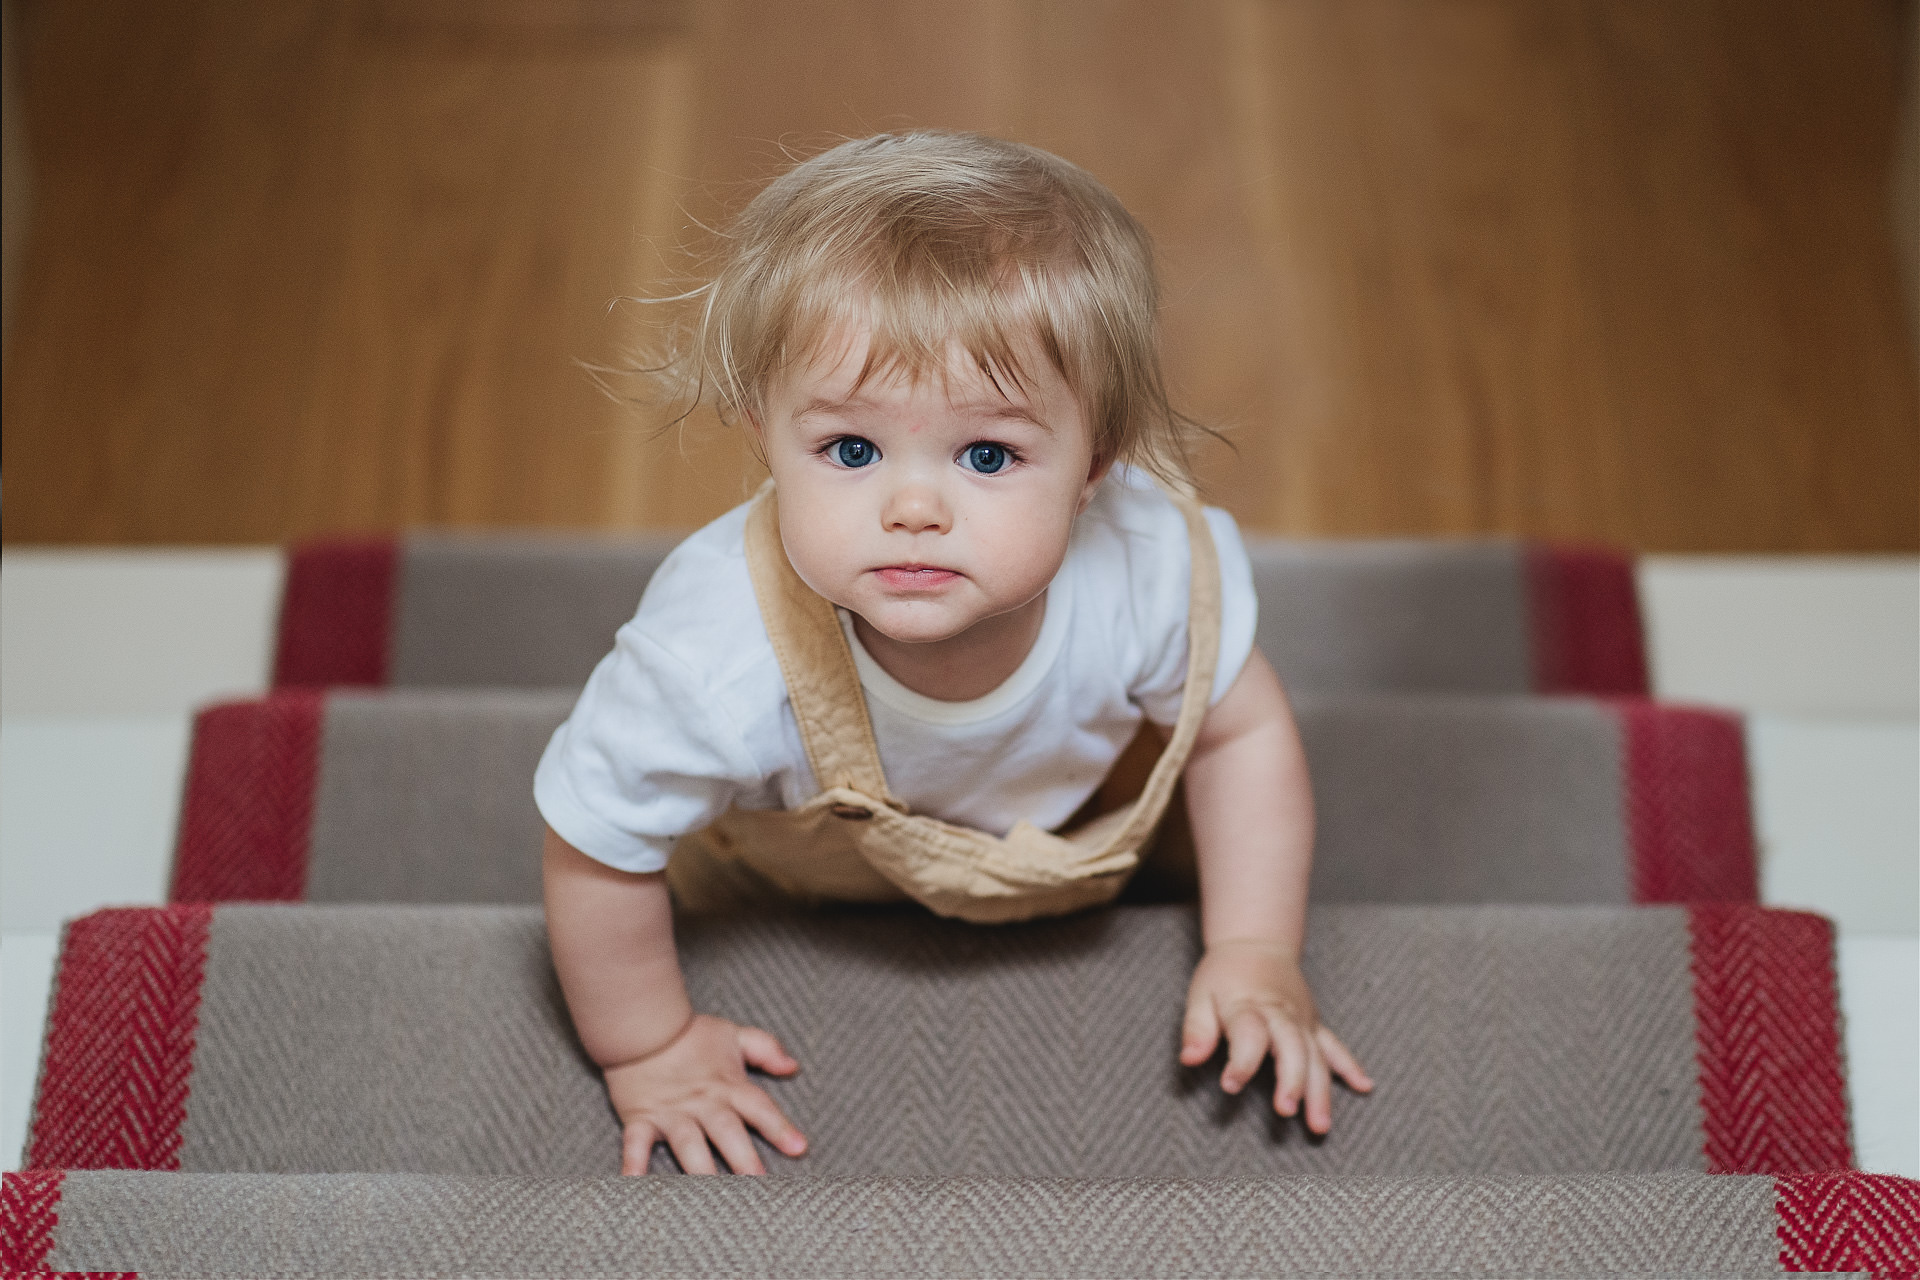 A baby crawling up stairs